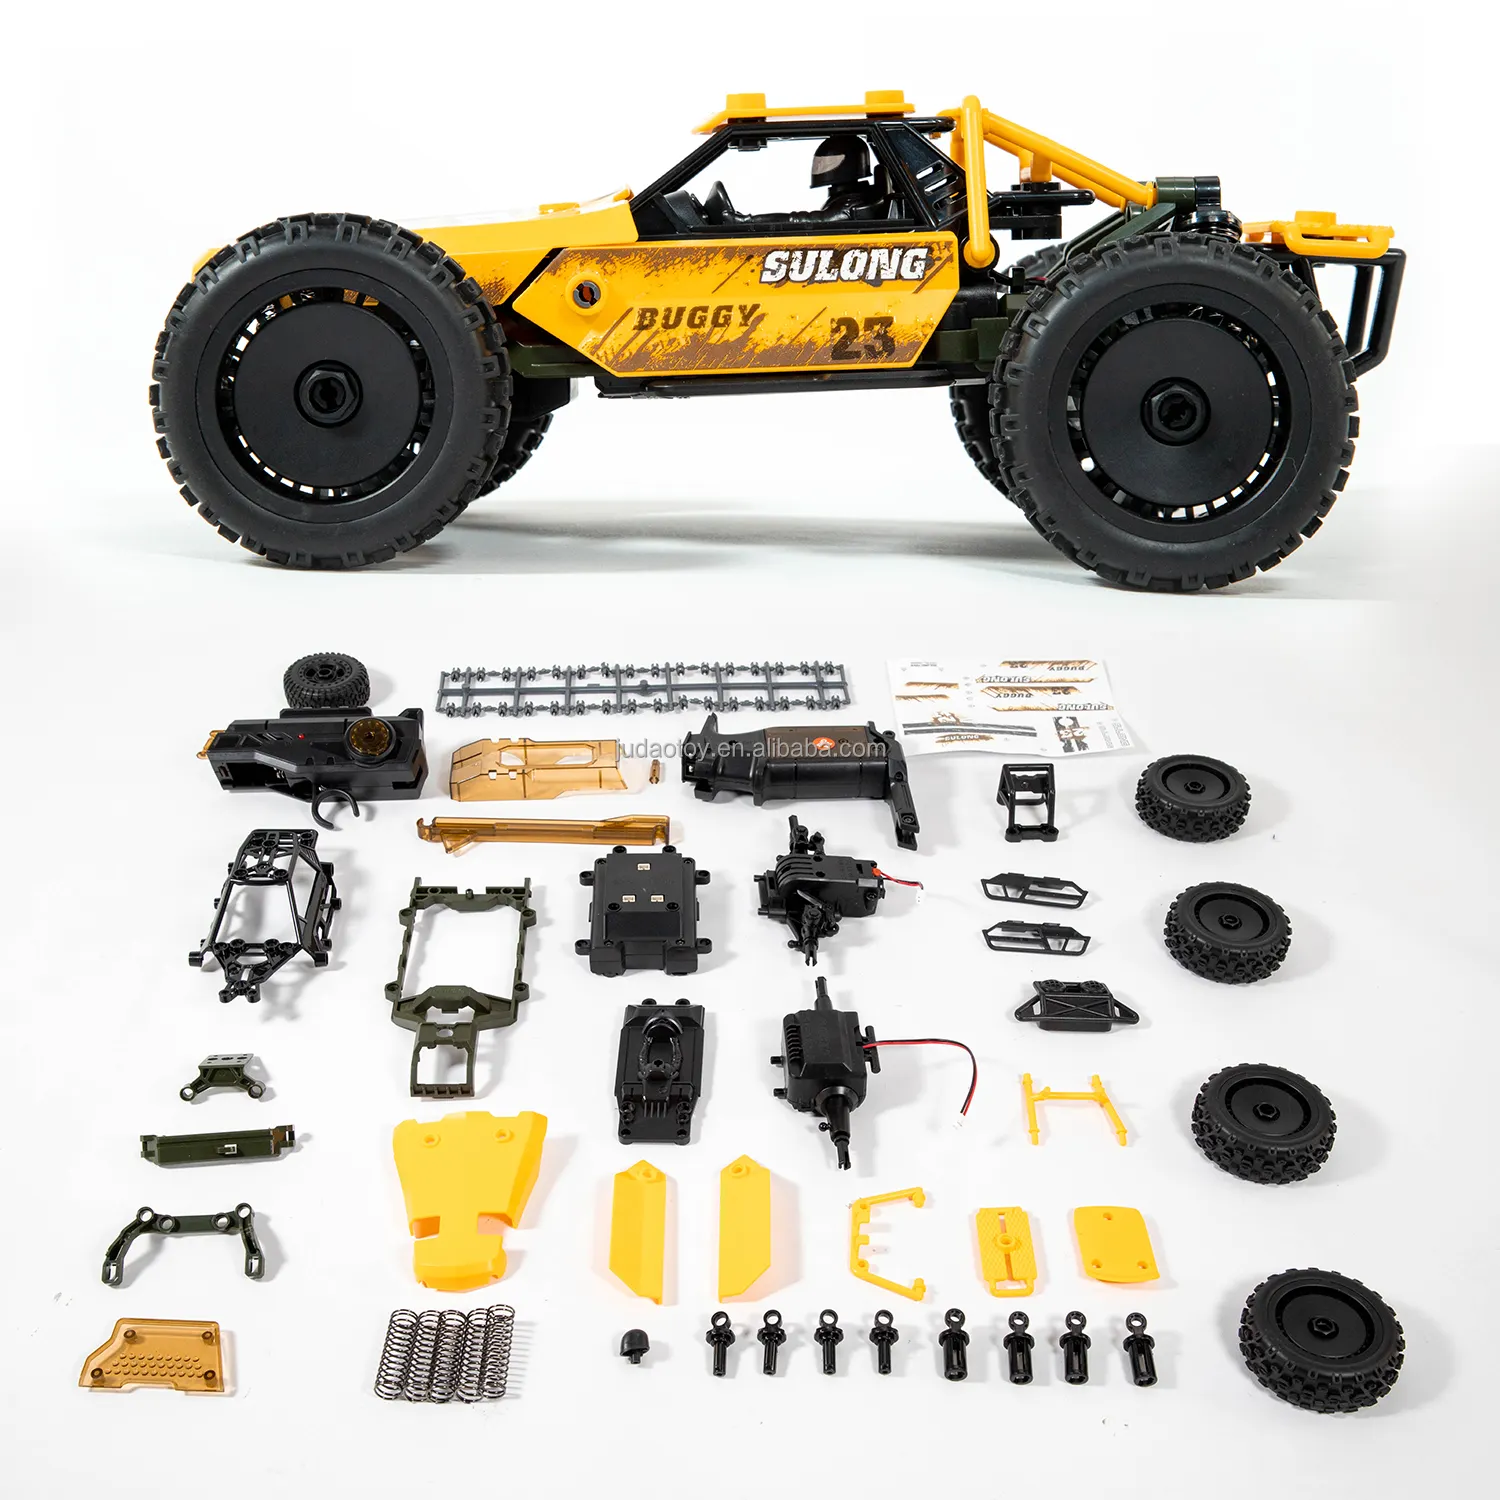 STEM RC Buggy Racer Educational Construction 1:18 Building Remote Control Truck Car Toy Smart Assembly Kit US Warehouse Spot